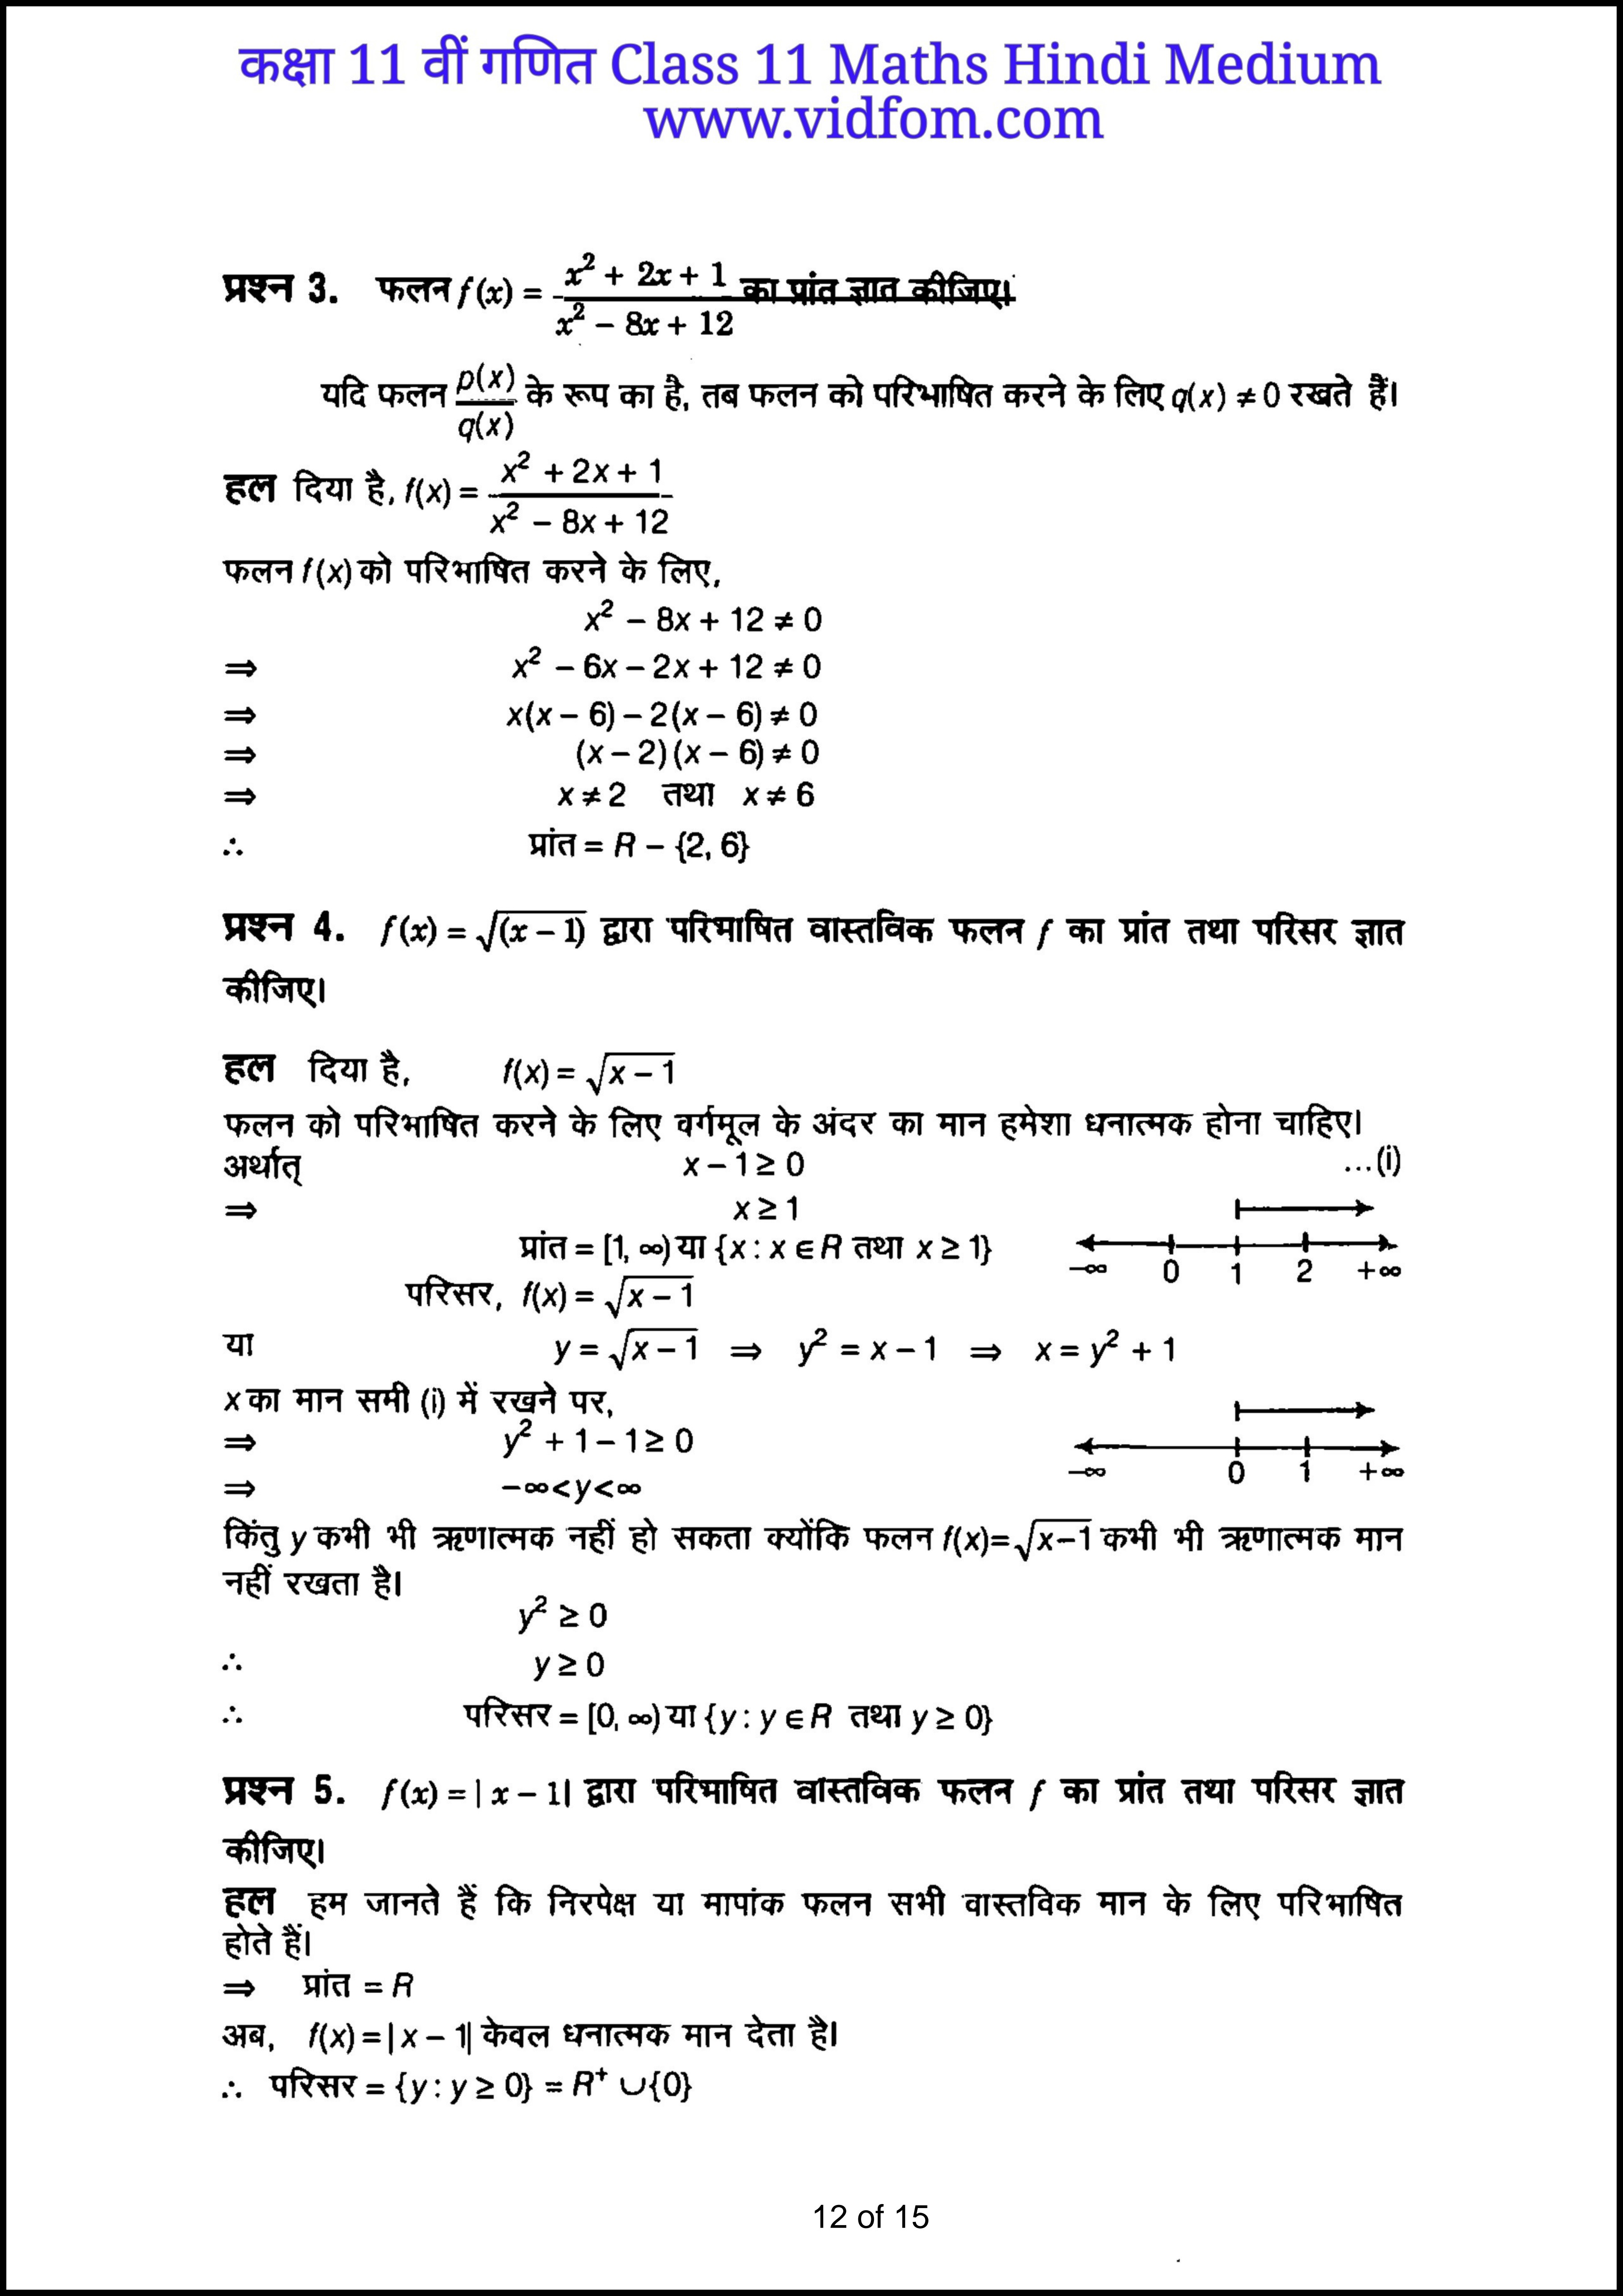 Class 11th Maths Chapter 2 Relations and Functions (संबंध एवं फलन) Notes PDF in Hindi